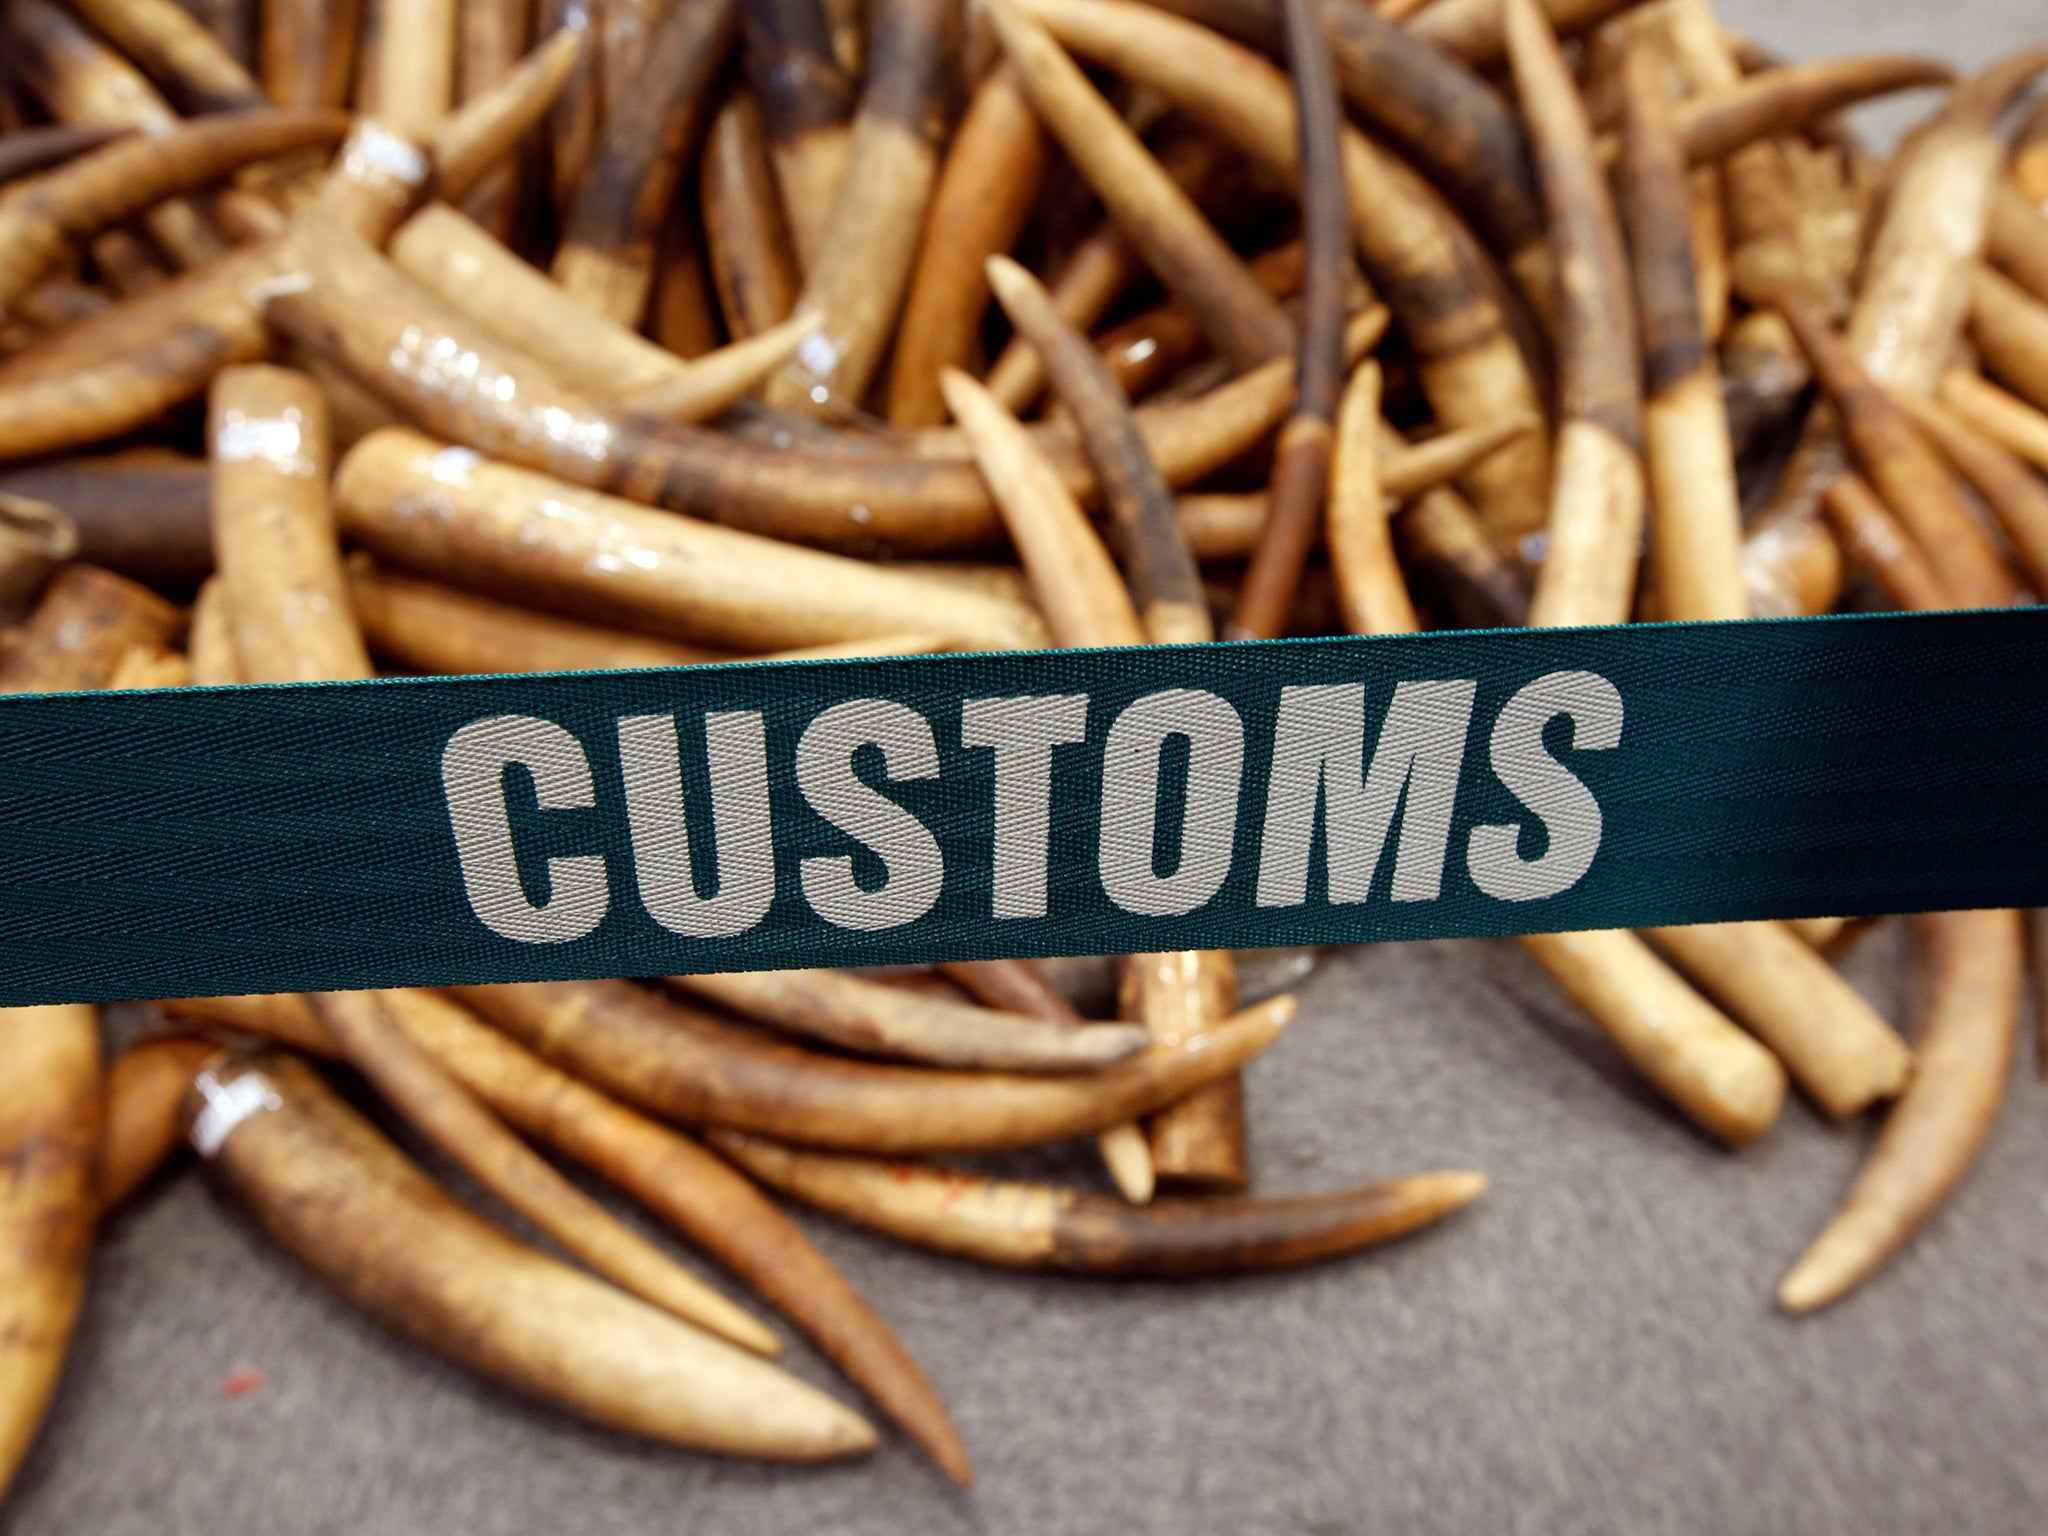 A haul of ivory tusks found by Hong Kong customs staff